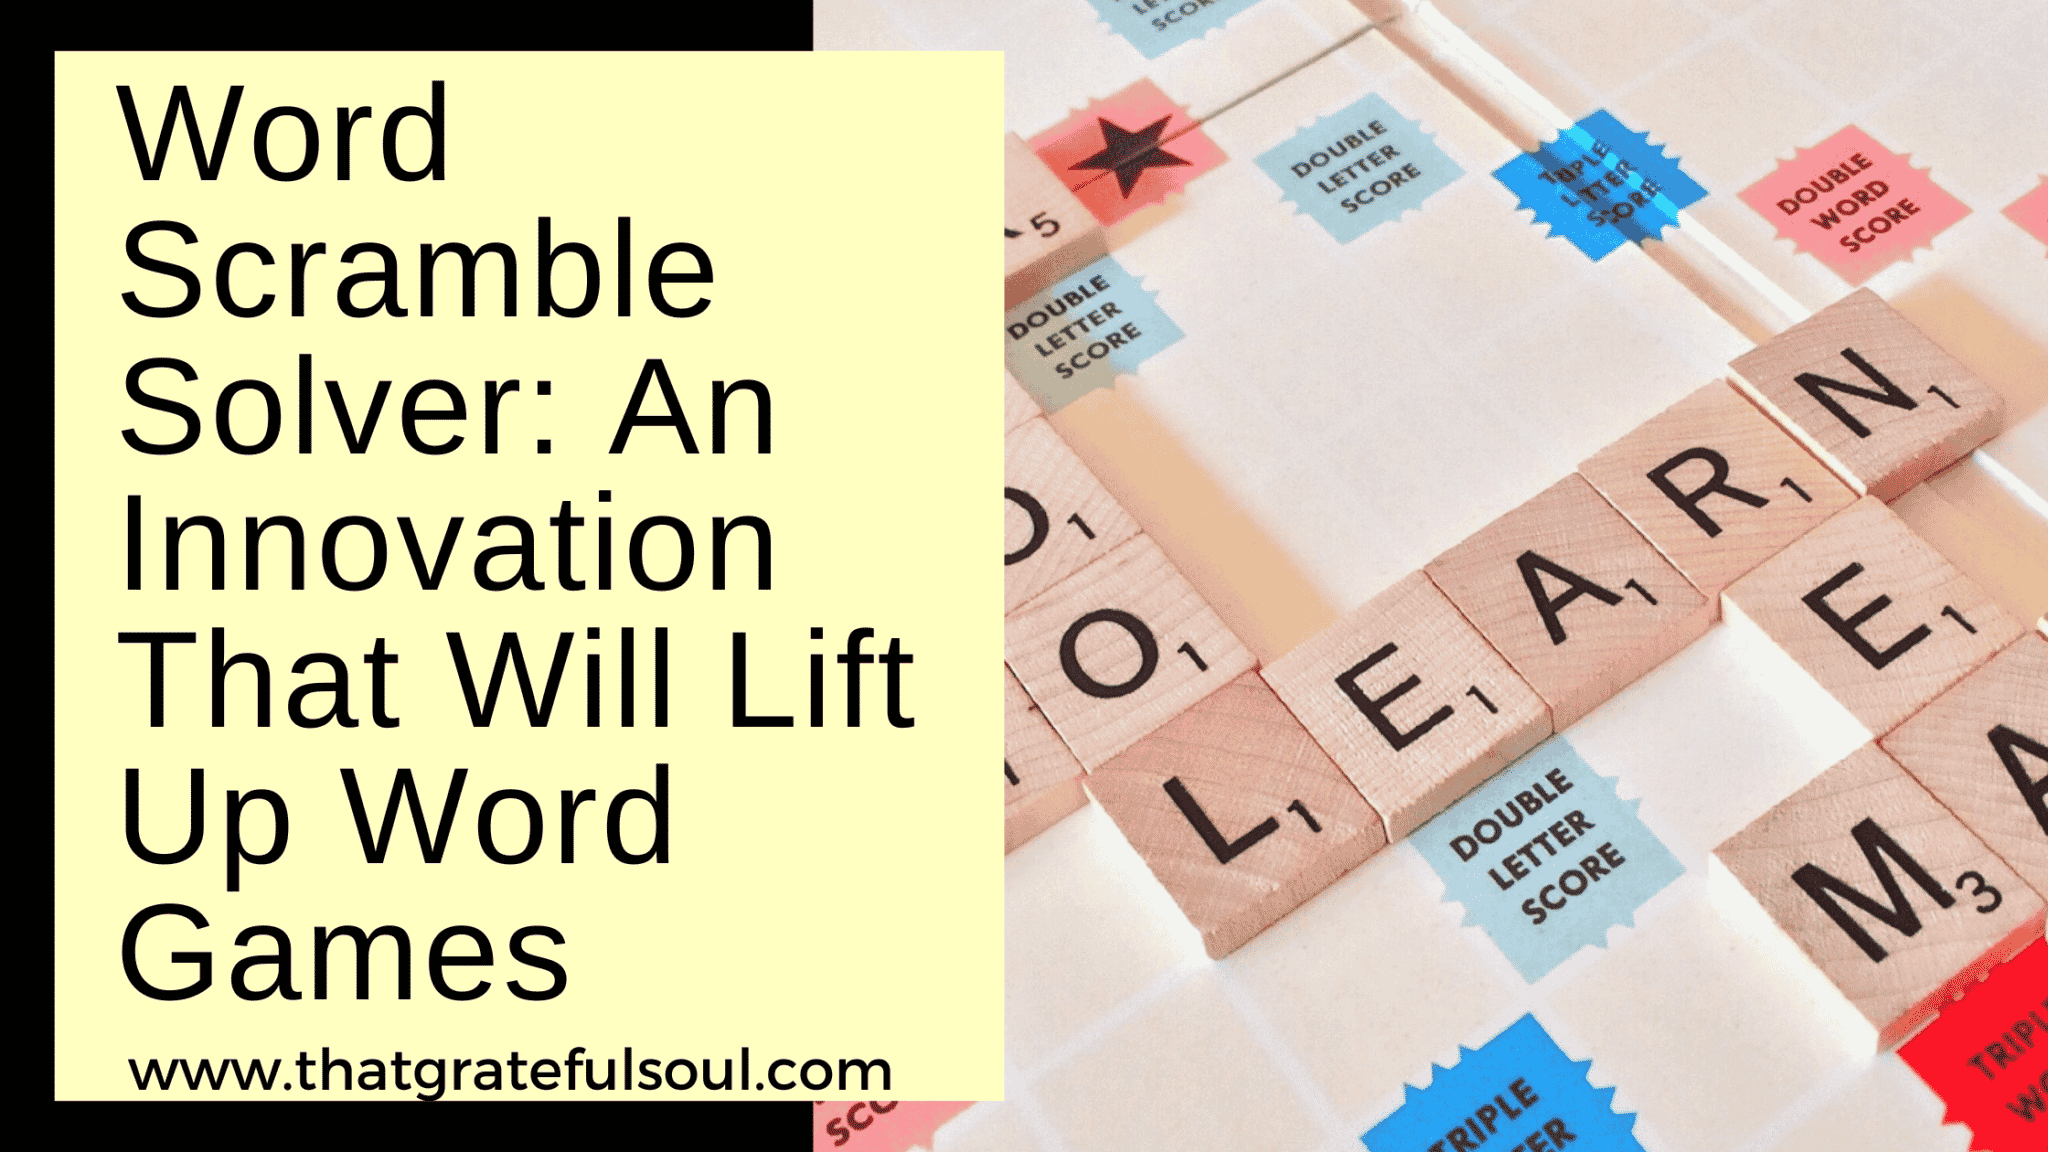 word-scramble-solver-an-innovation-that-will-lift-up-word-games-that-grateful-soul